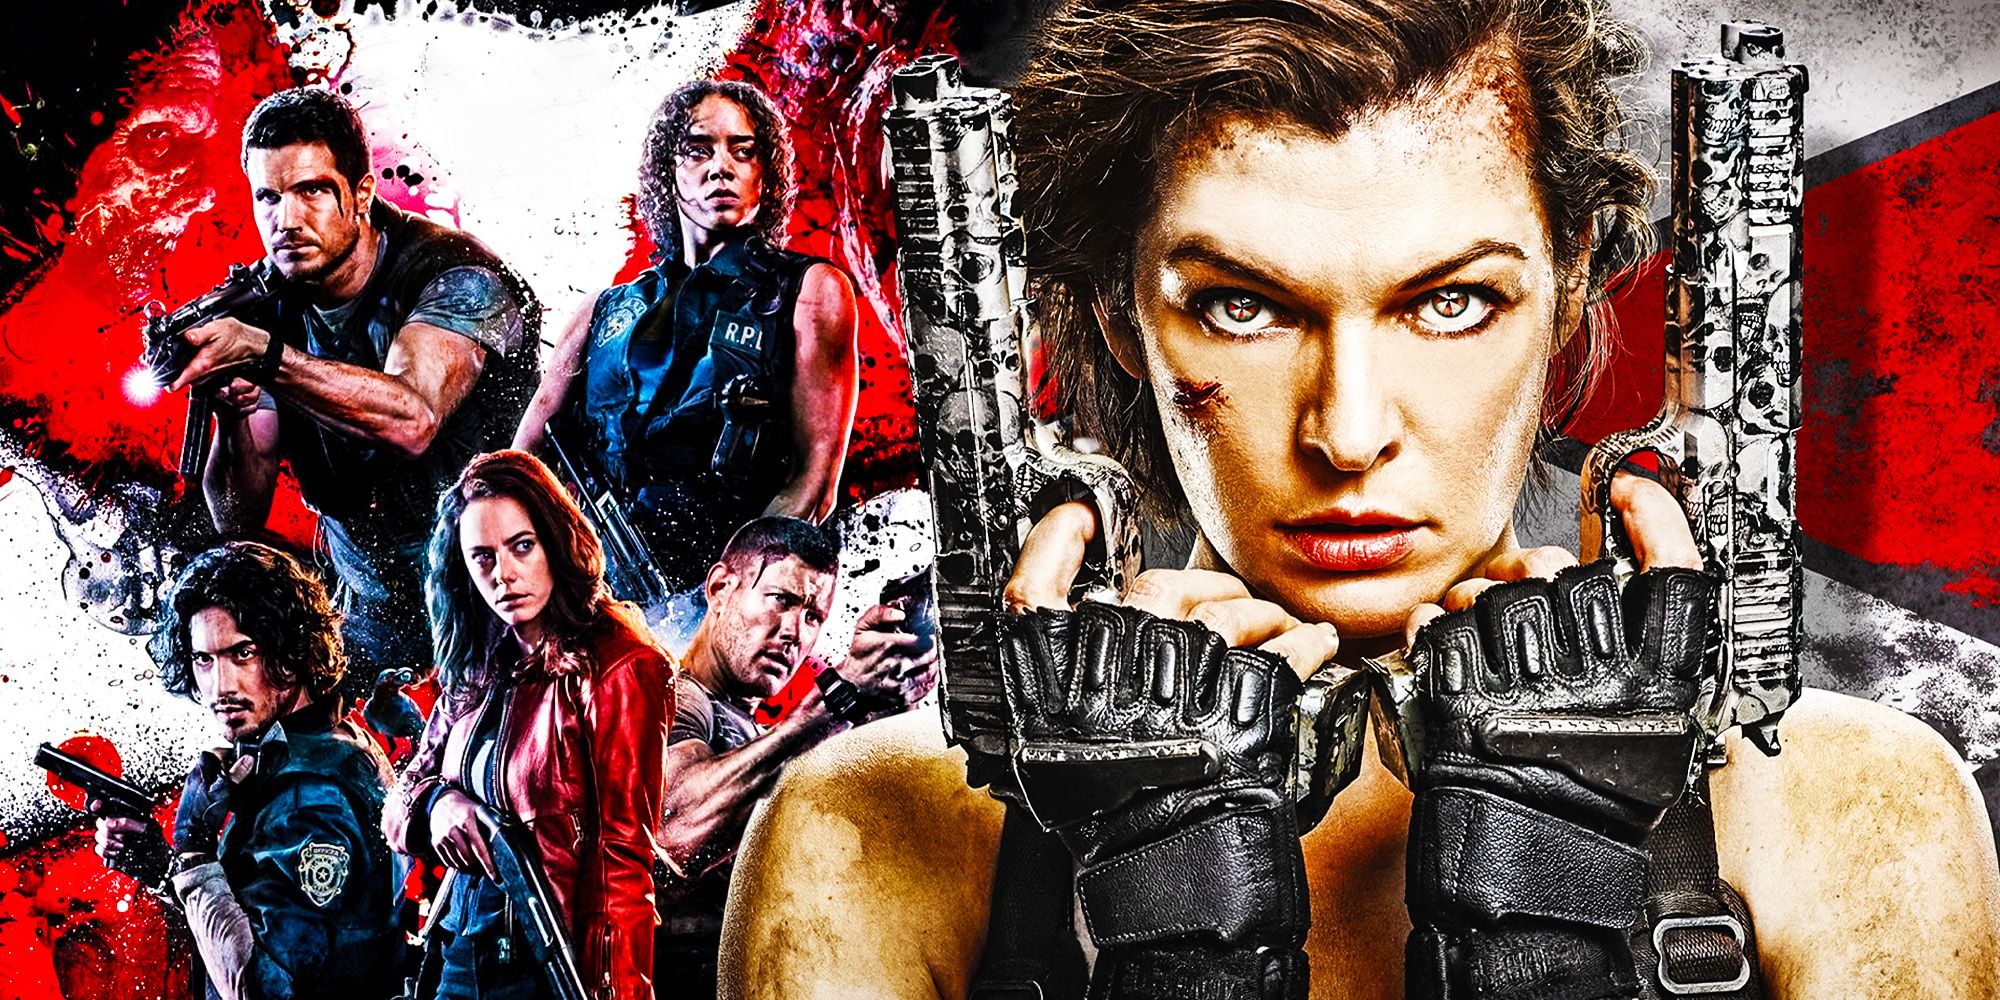 Resident Evil movie reboot in the works, will be faithful to games